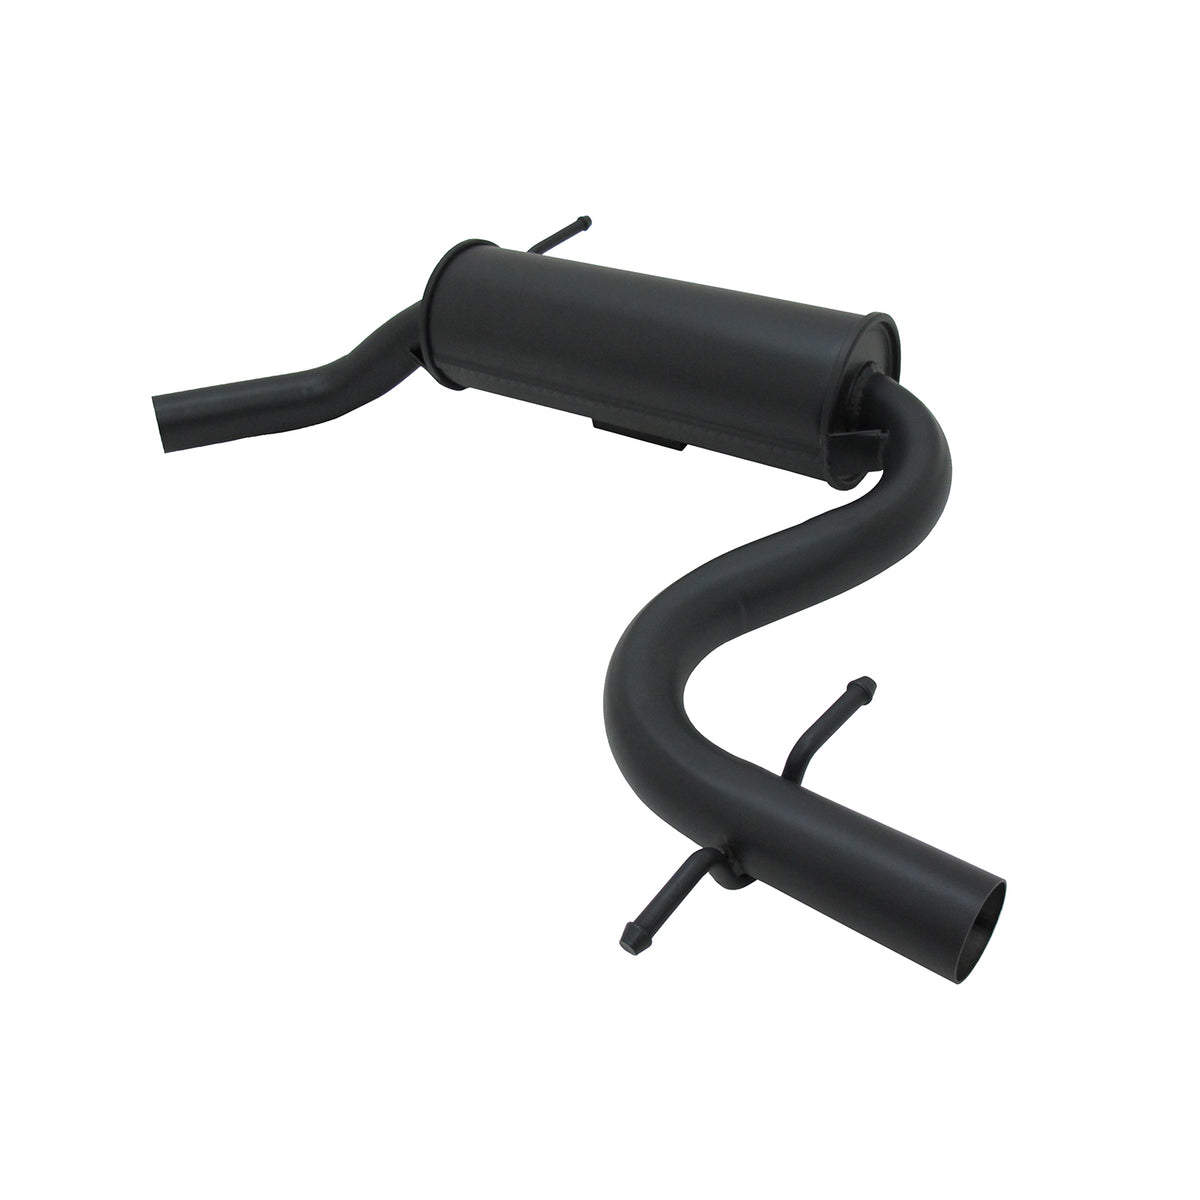 NOVUS Sport front silencer for A3 8P Leon 1P Golf 5 6 Scirocco with EC